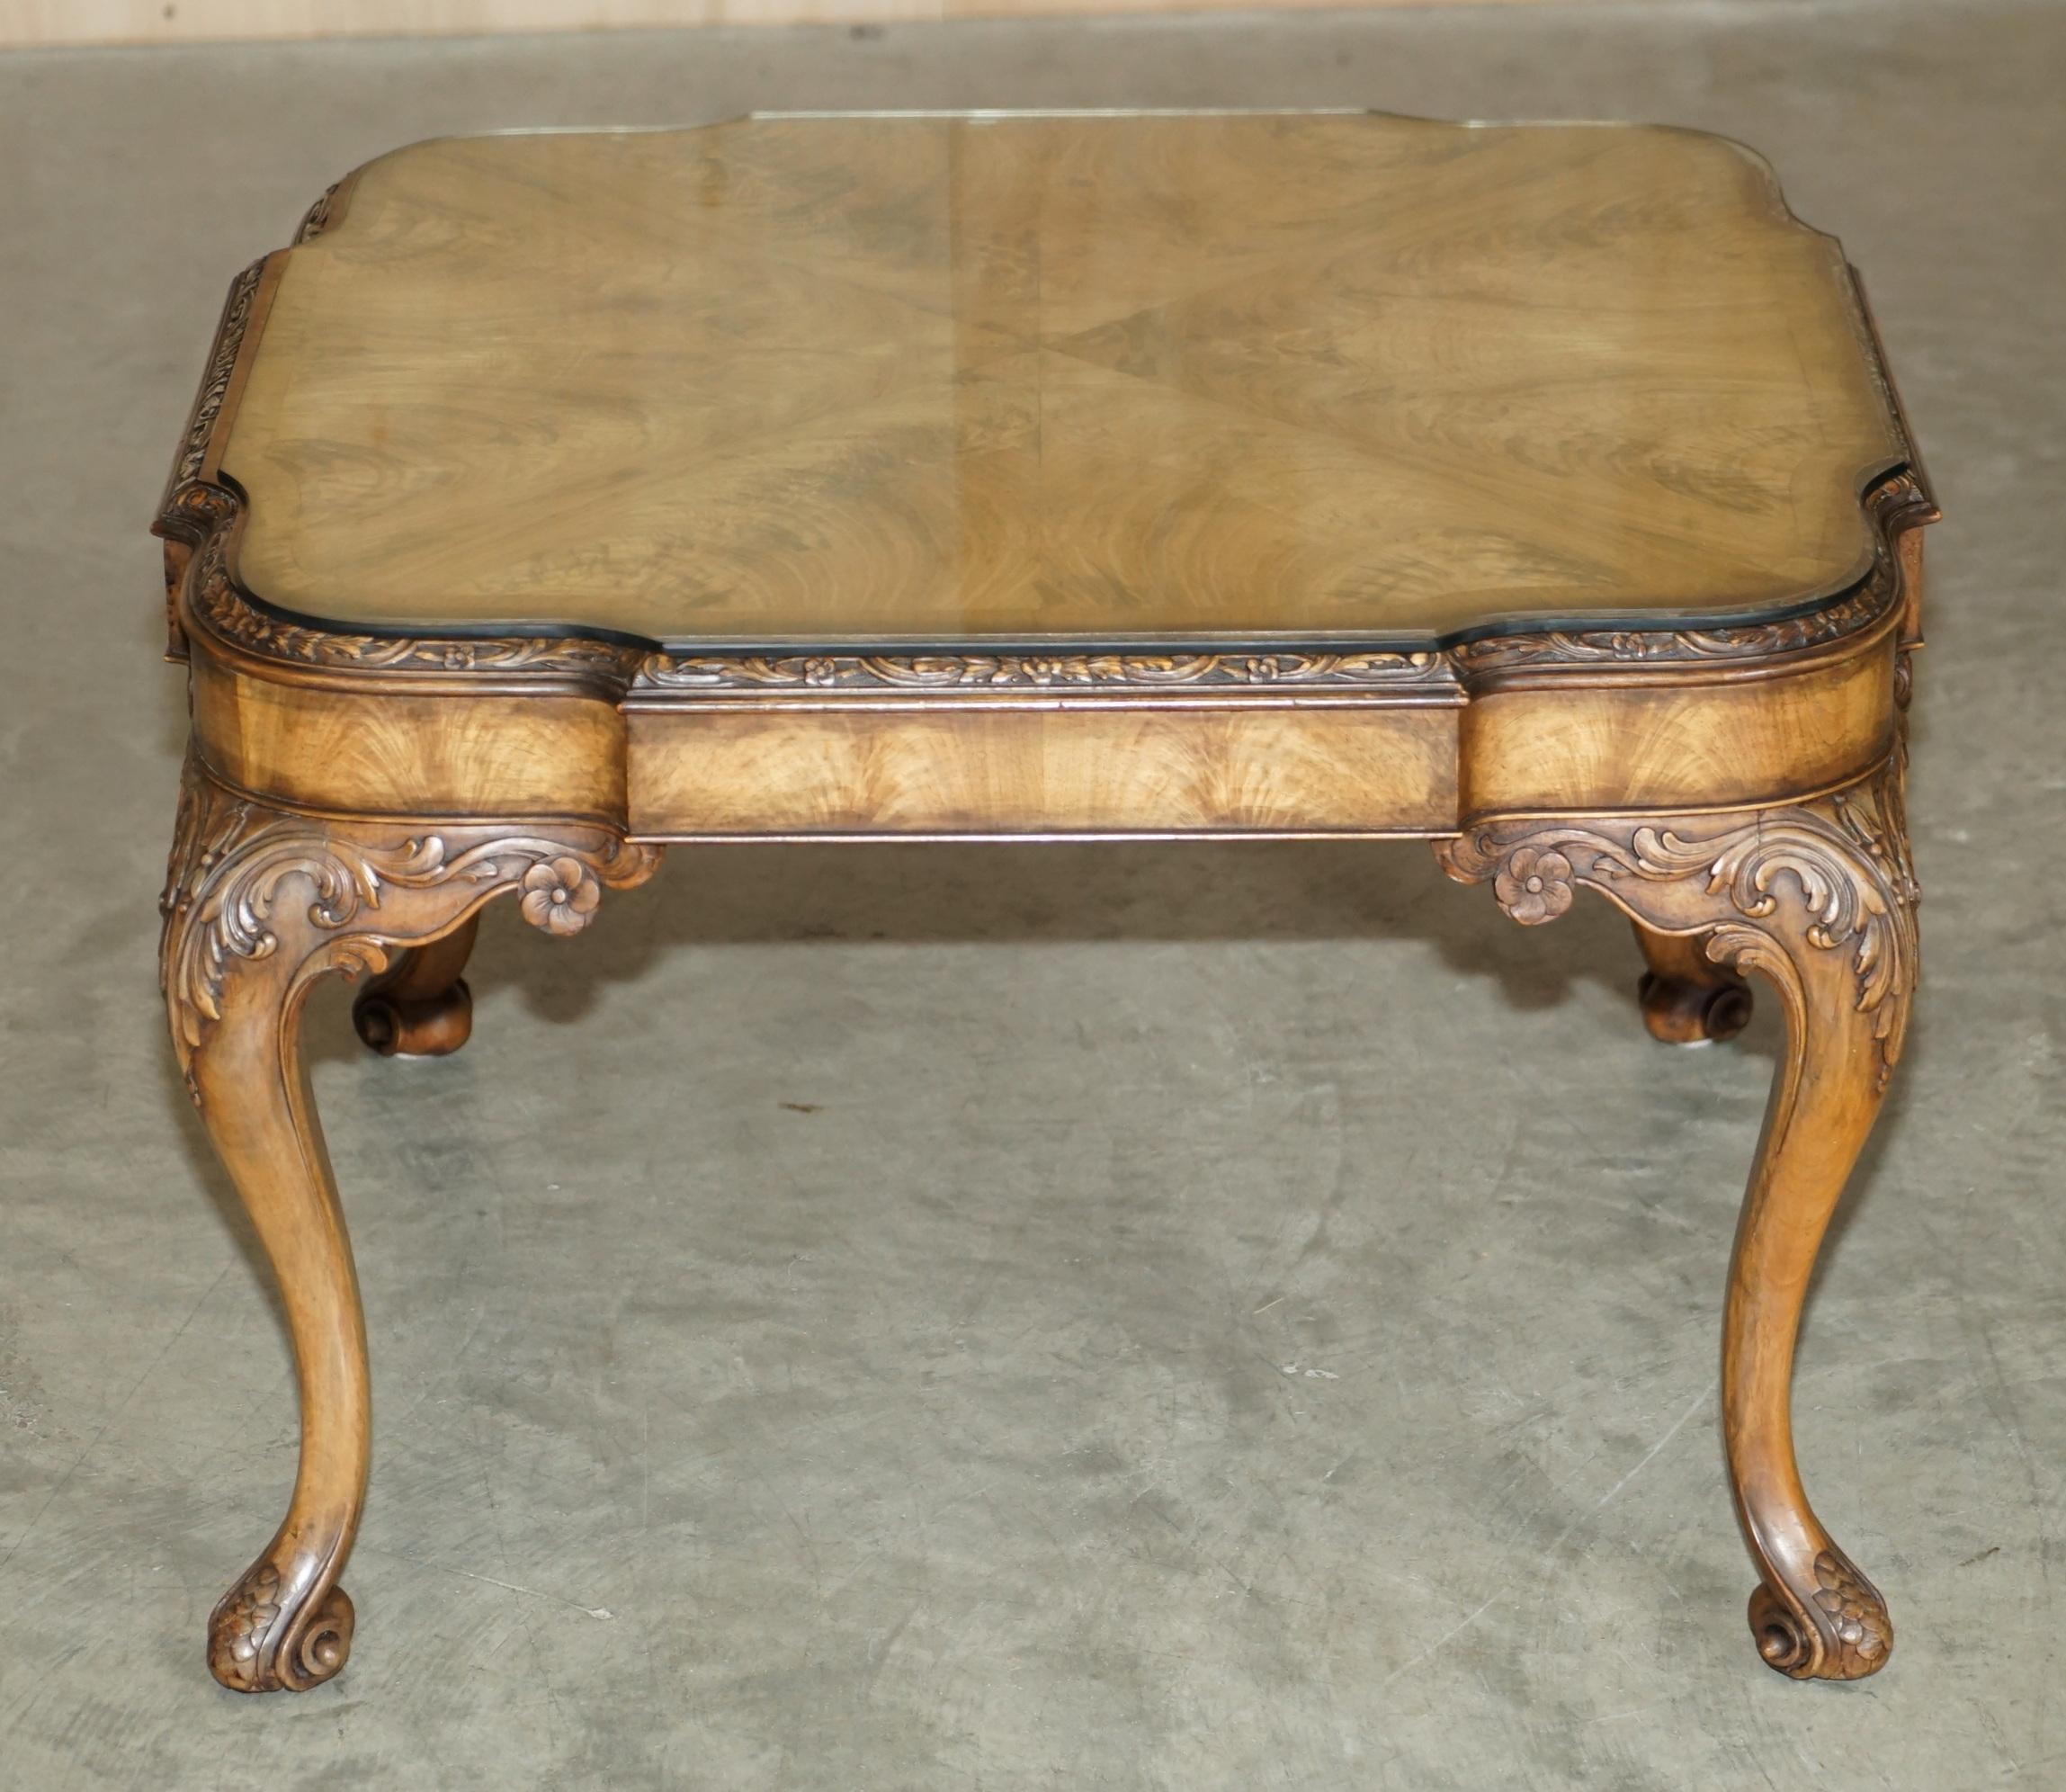 Victorian Exquisite Burr Walnut Coffee Cocktail Table with Ornately Carved Cabriole Legs For Sale